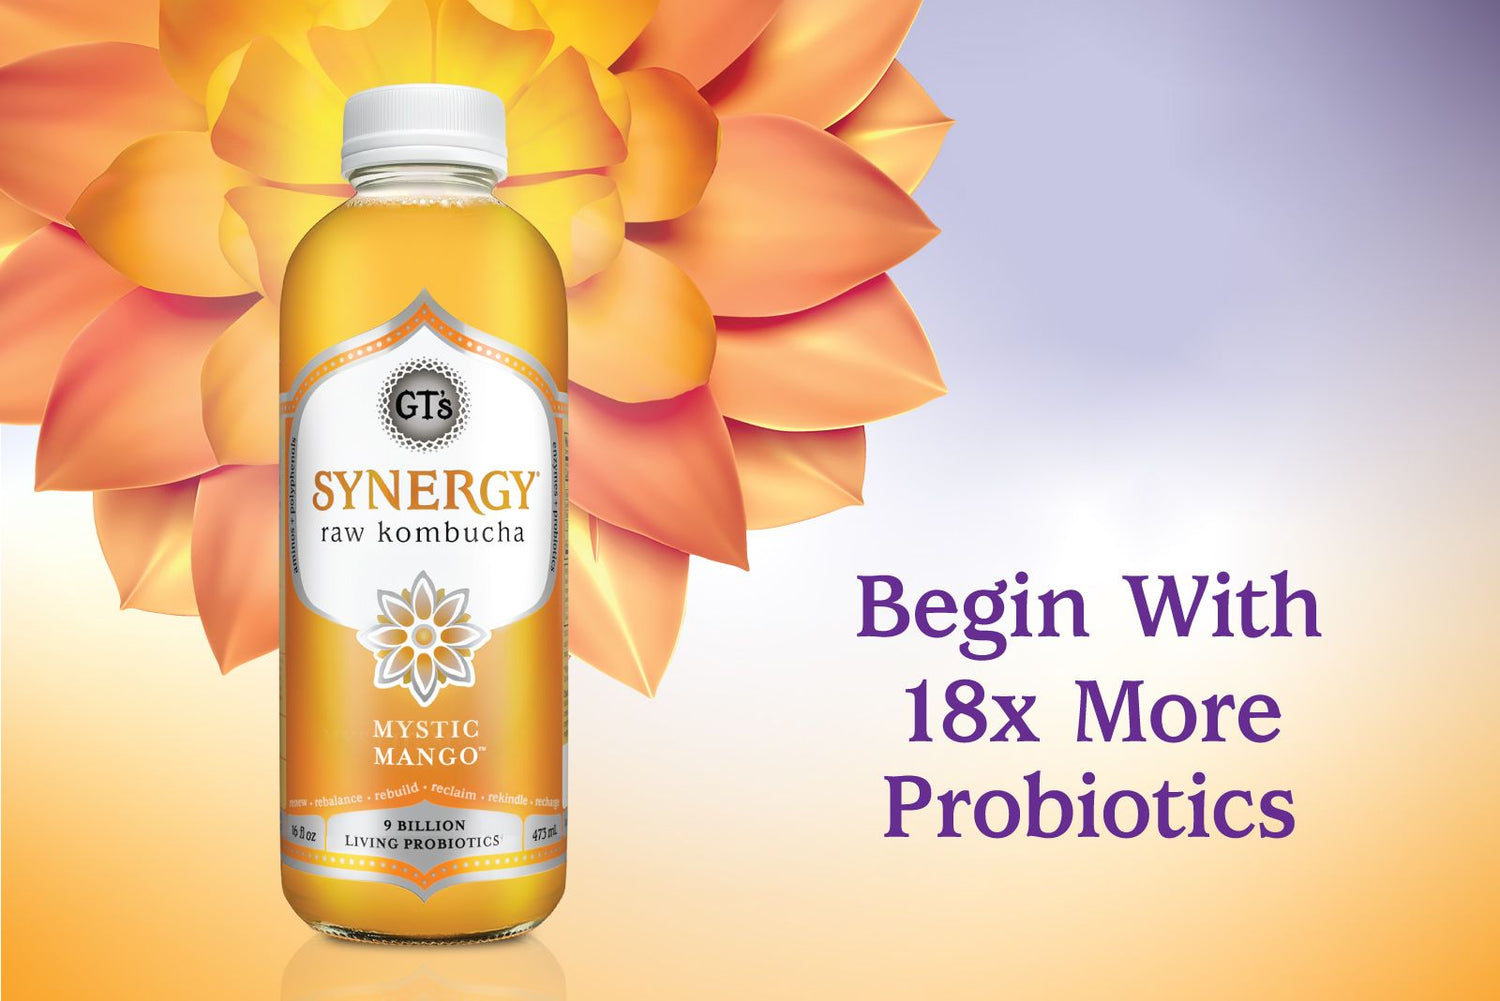 Begin Within: The Next Chapter for SYNERGY Kombucha